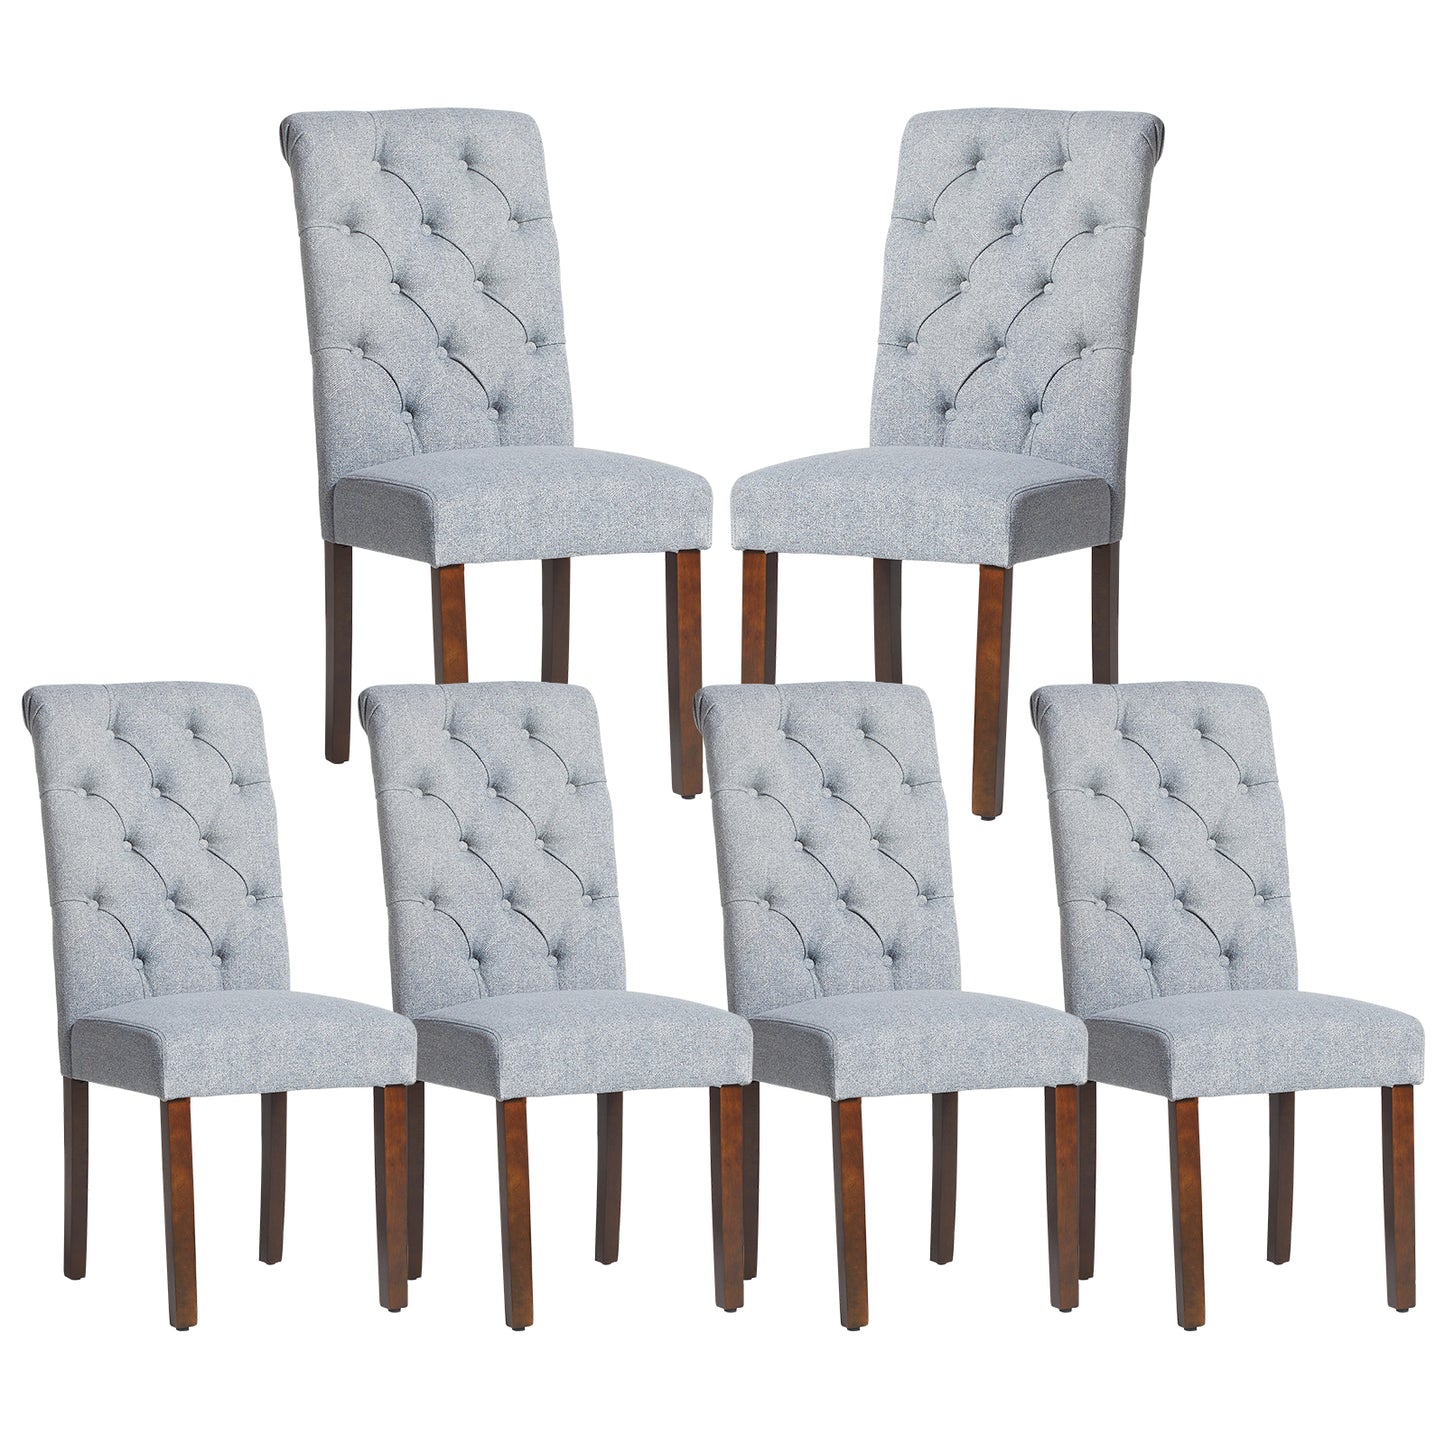 COLAMY Tufted Fabric Dining Chair Rolled Back Kitchen Chair with Wooden Legs